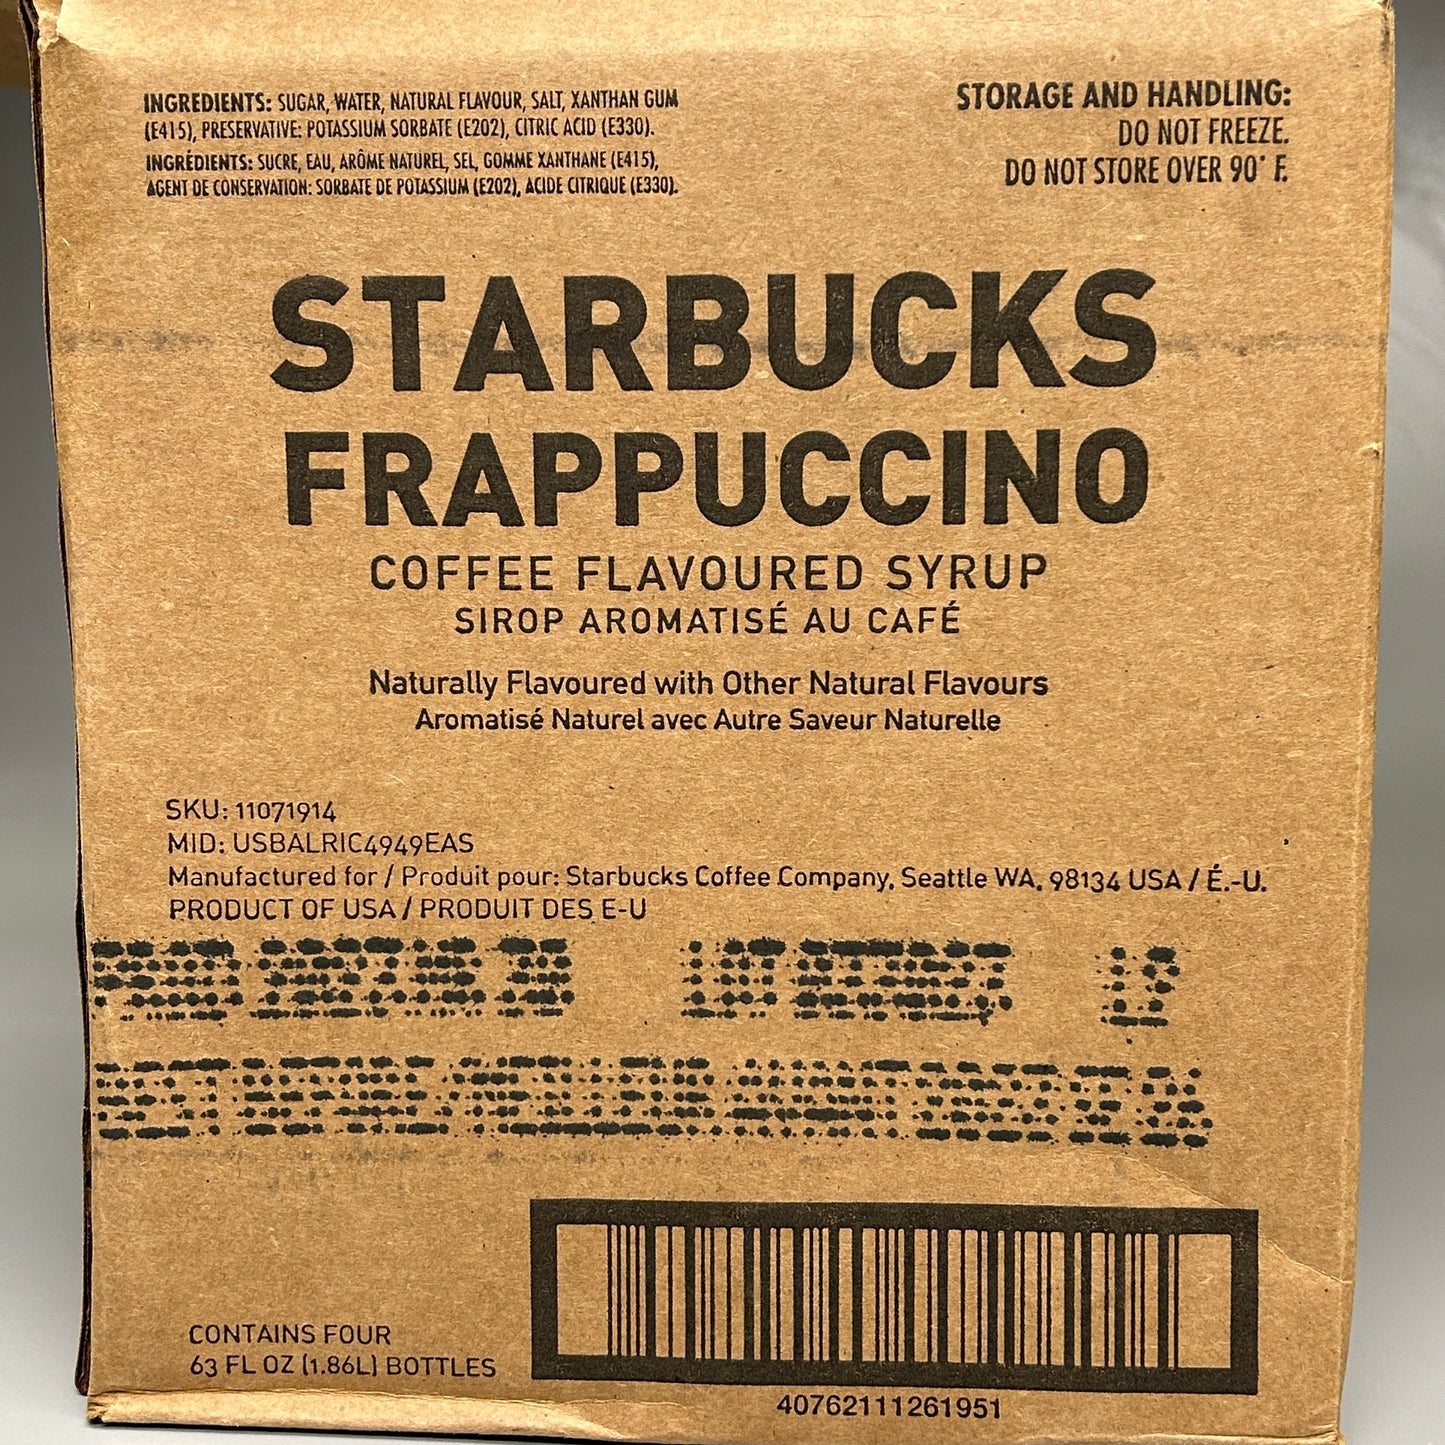 ZA@ STARBUCKS 4-PACK! Frappuccino Syrup Creme Flavored Syrup (1.86 L/bottle) BB 09/23 (New)